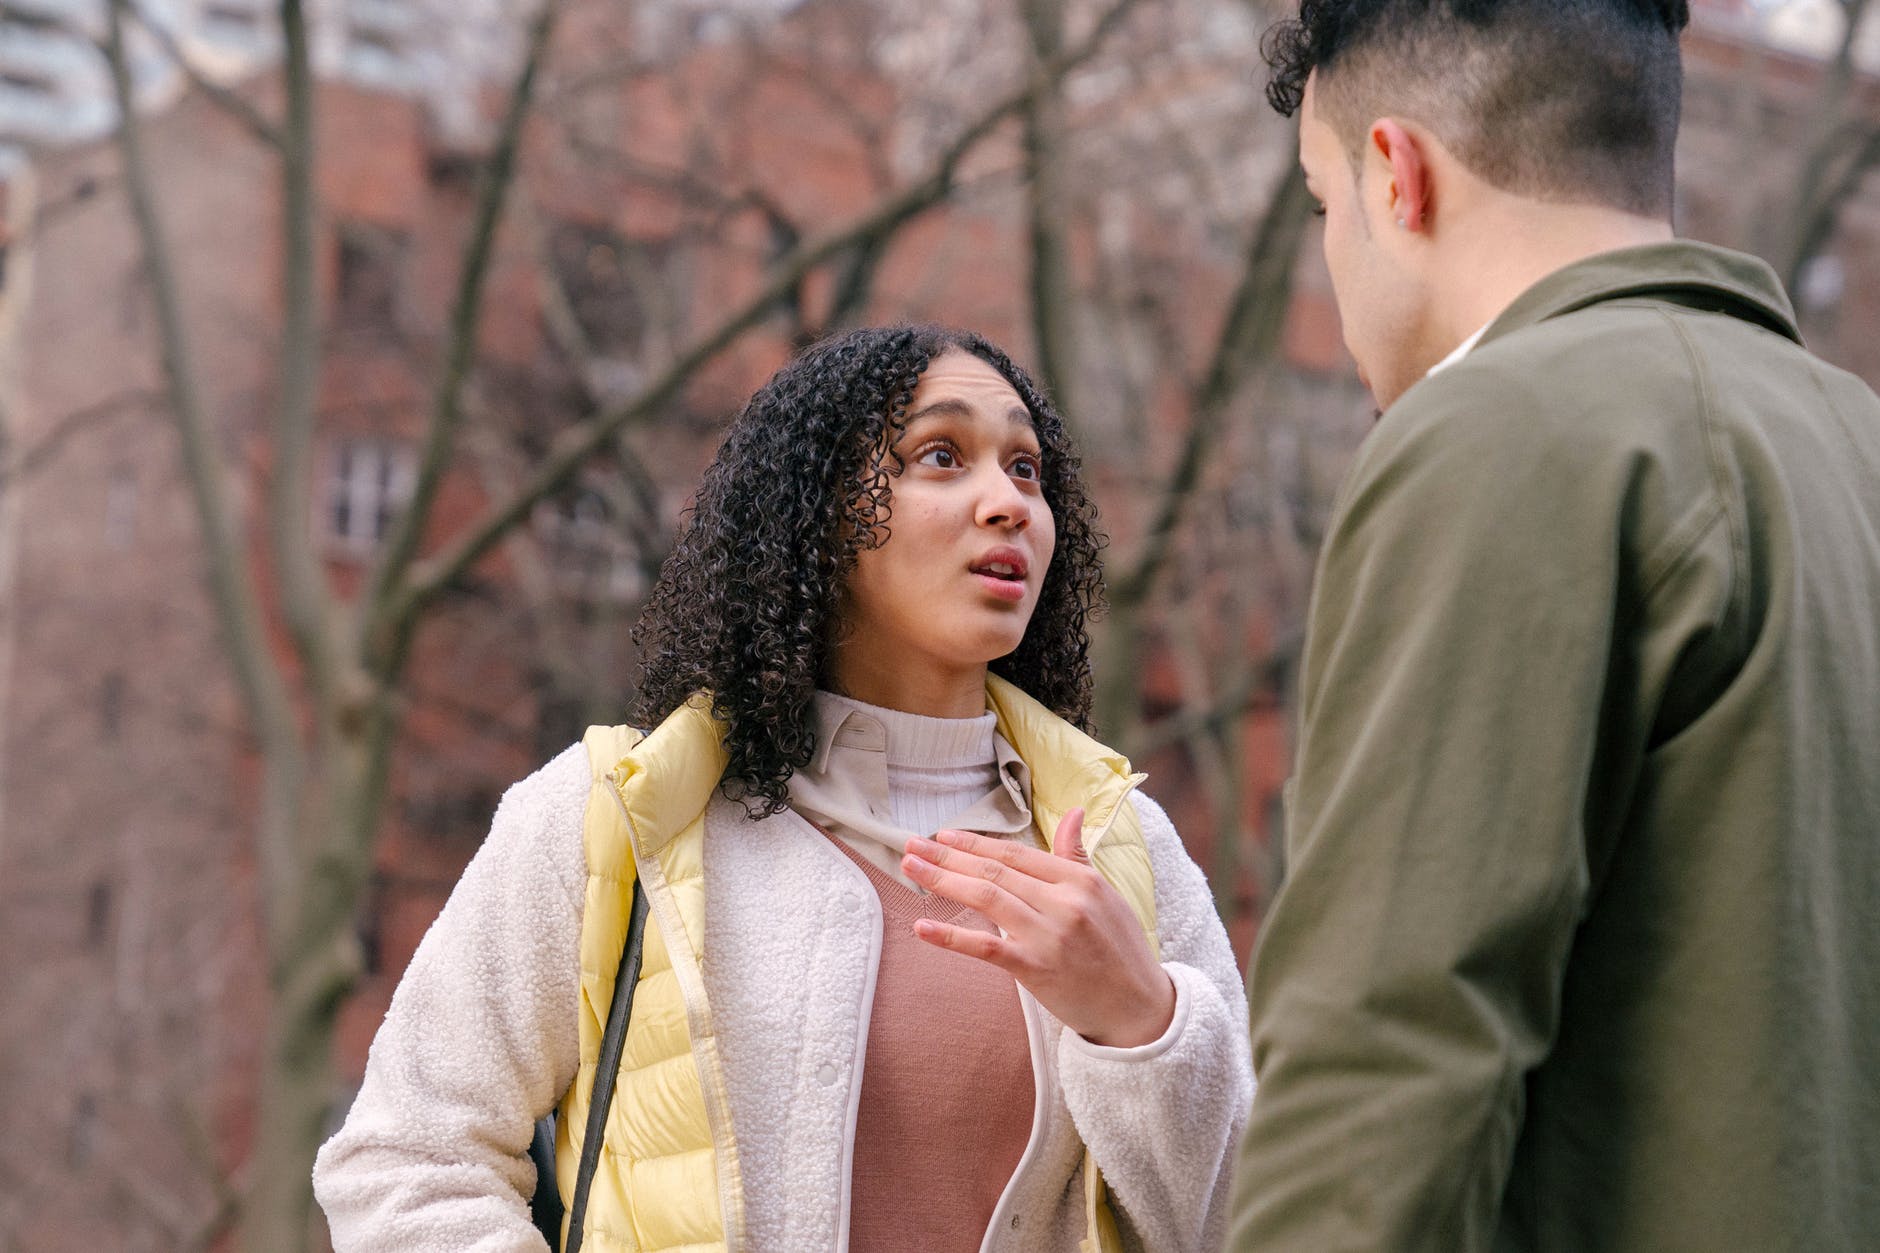 ethnic couple arguing on street in daytime